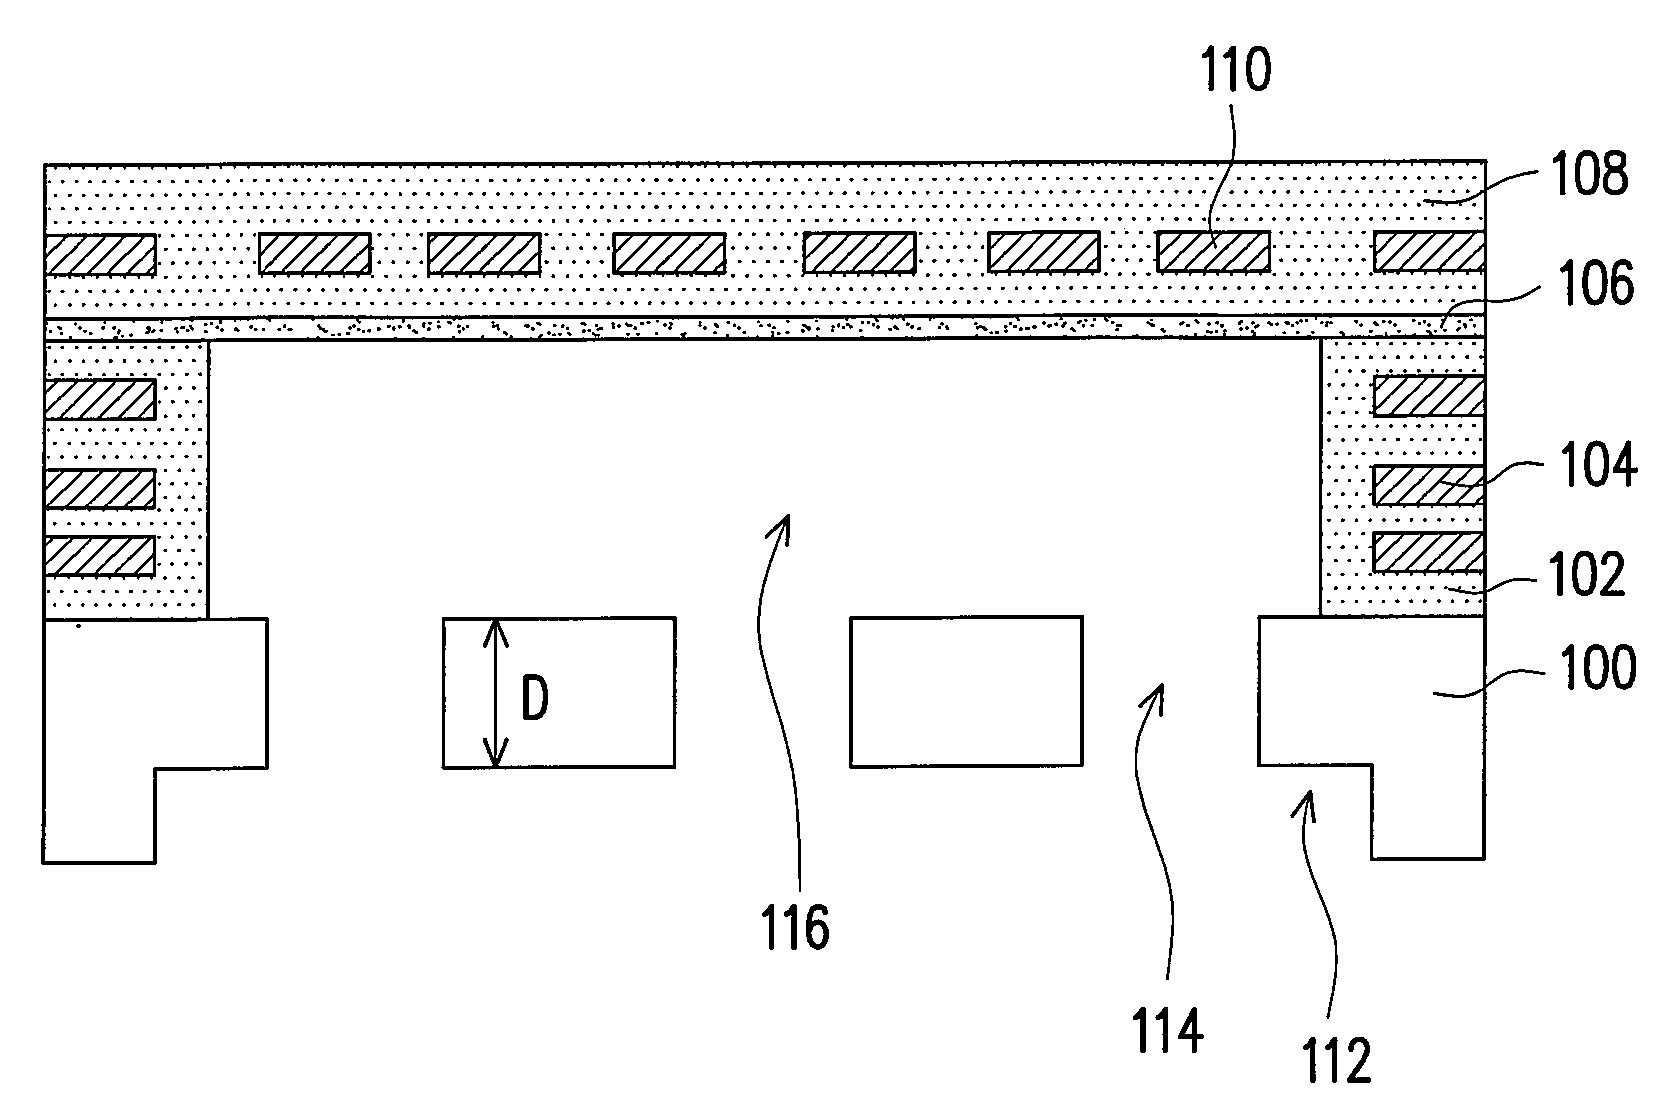 Micro-electro-mechanical systems (MEMS) device and process for fabricating the same